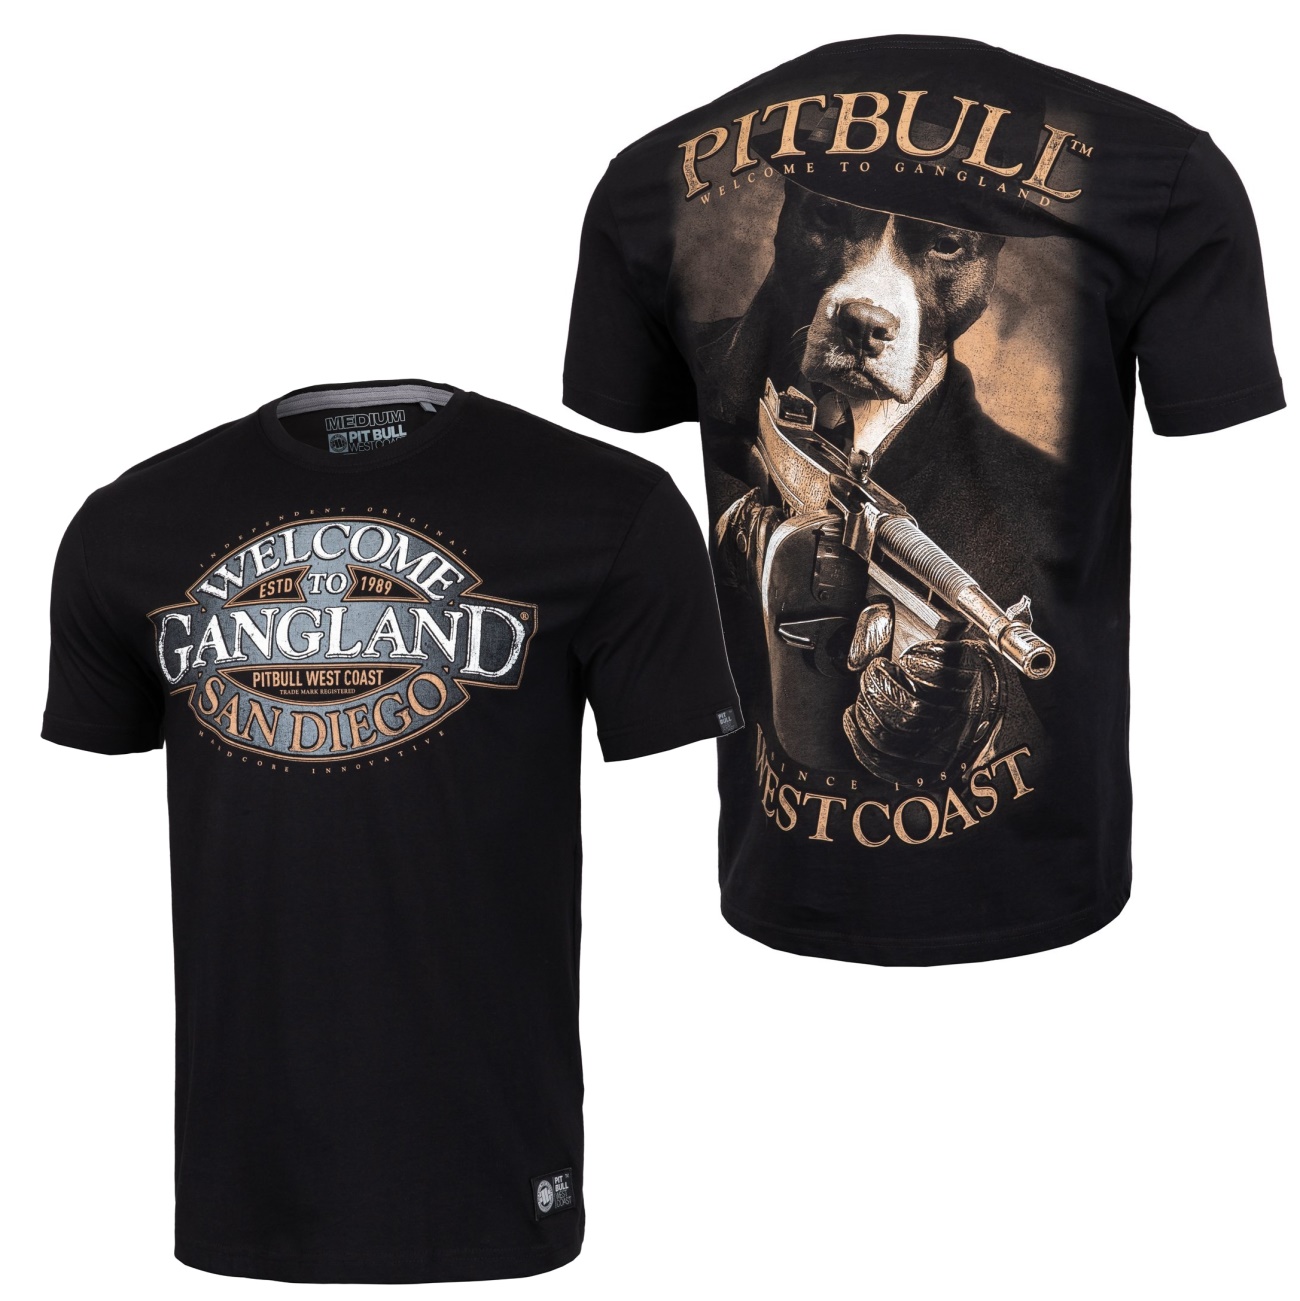 behind count get annoyed pitbull germany t shirt loan Stranger Contradict